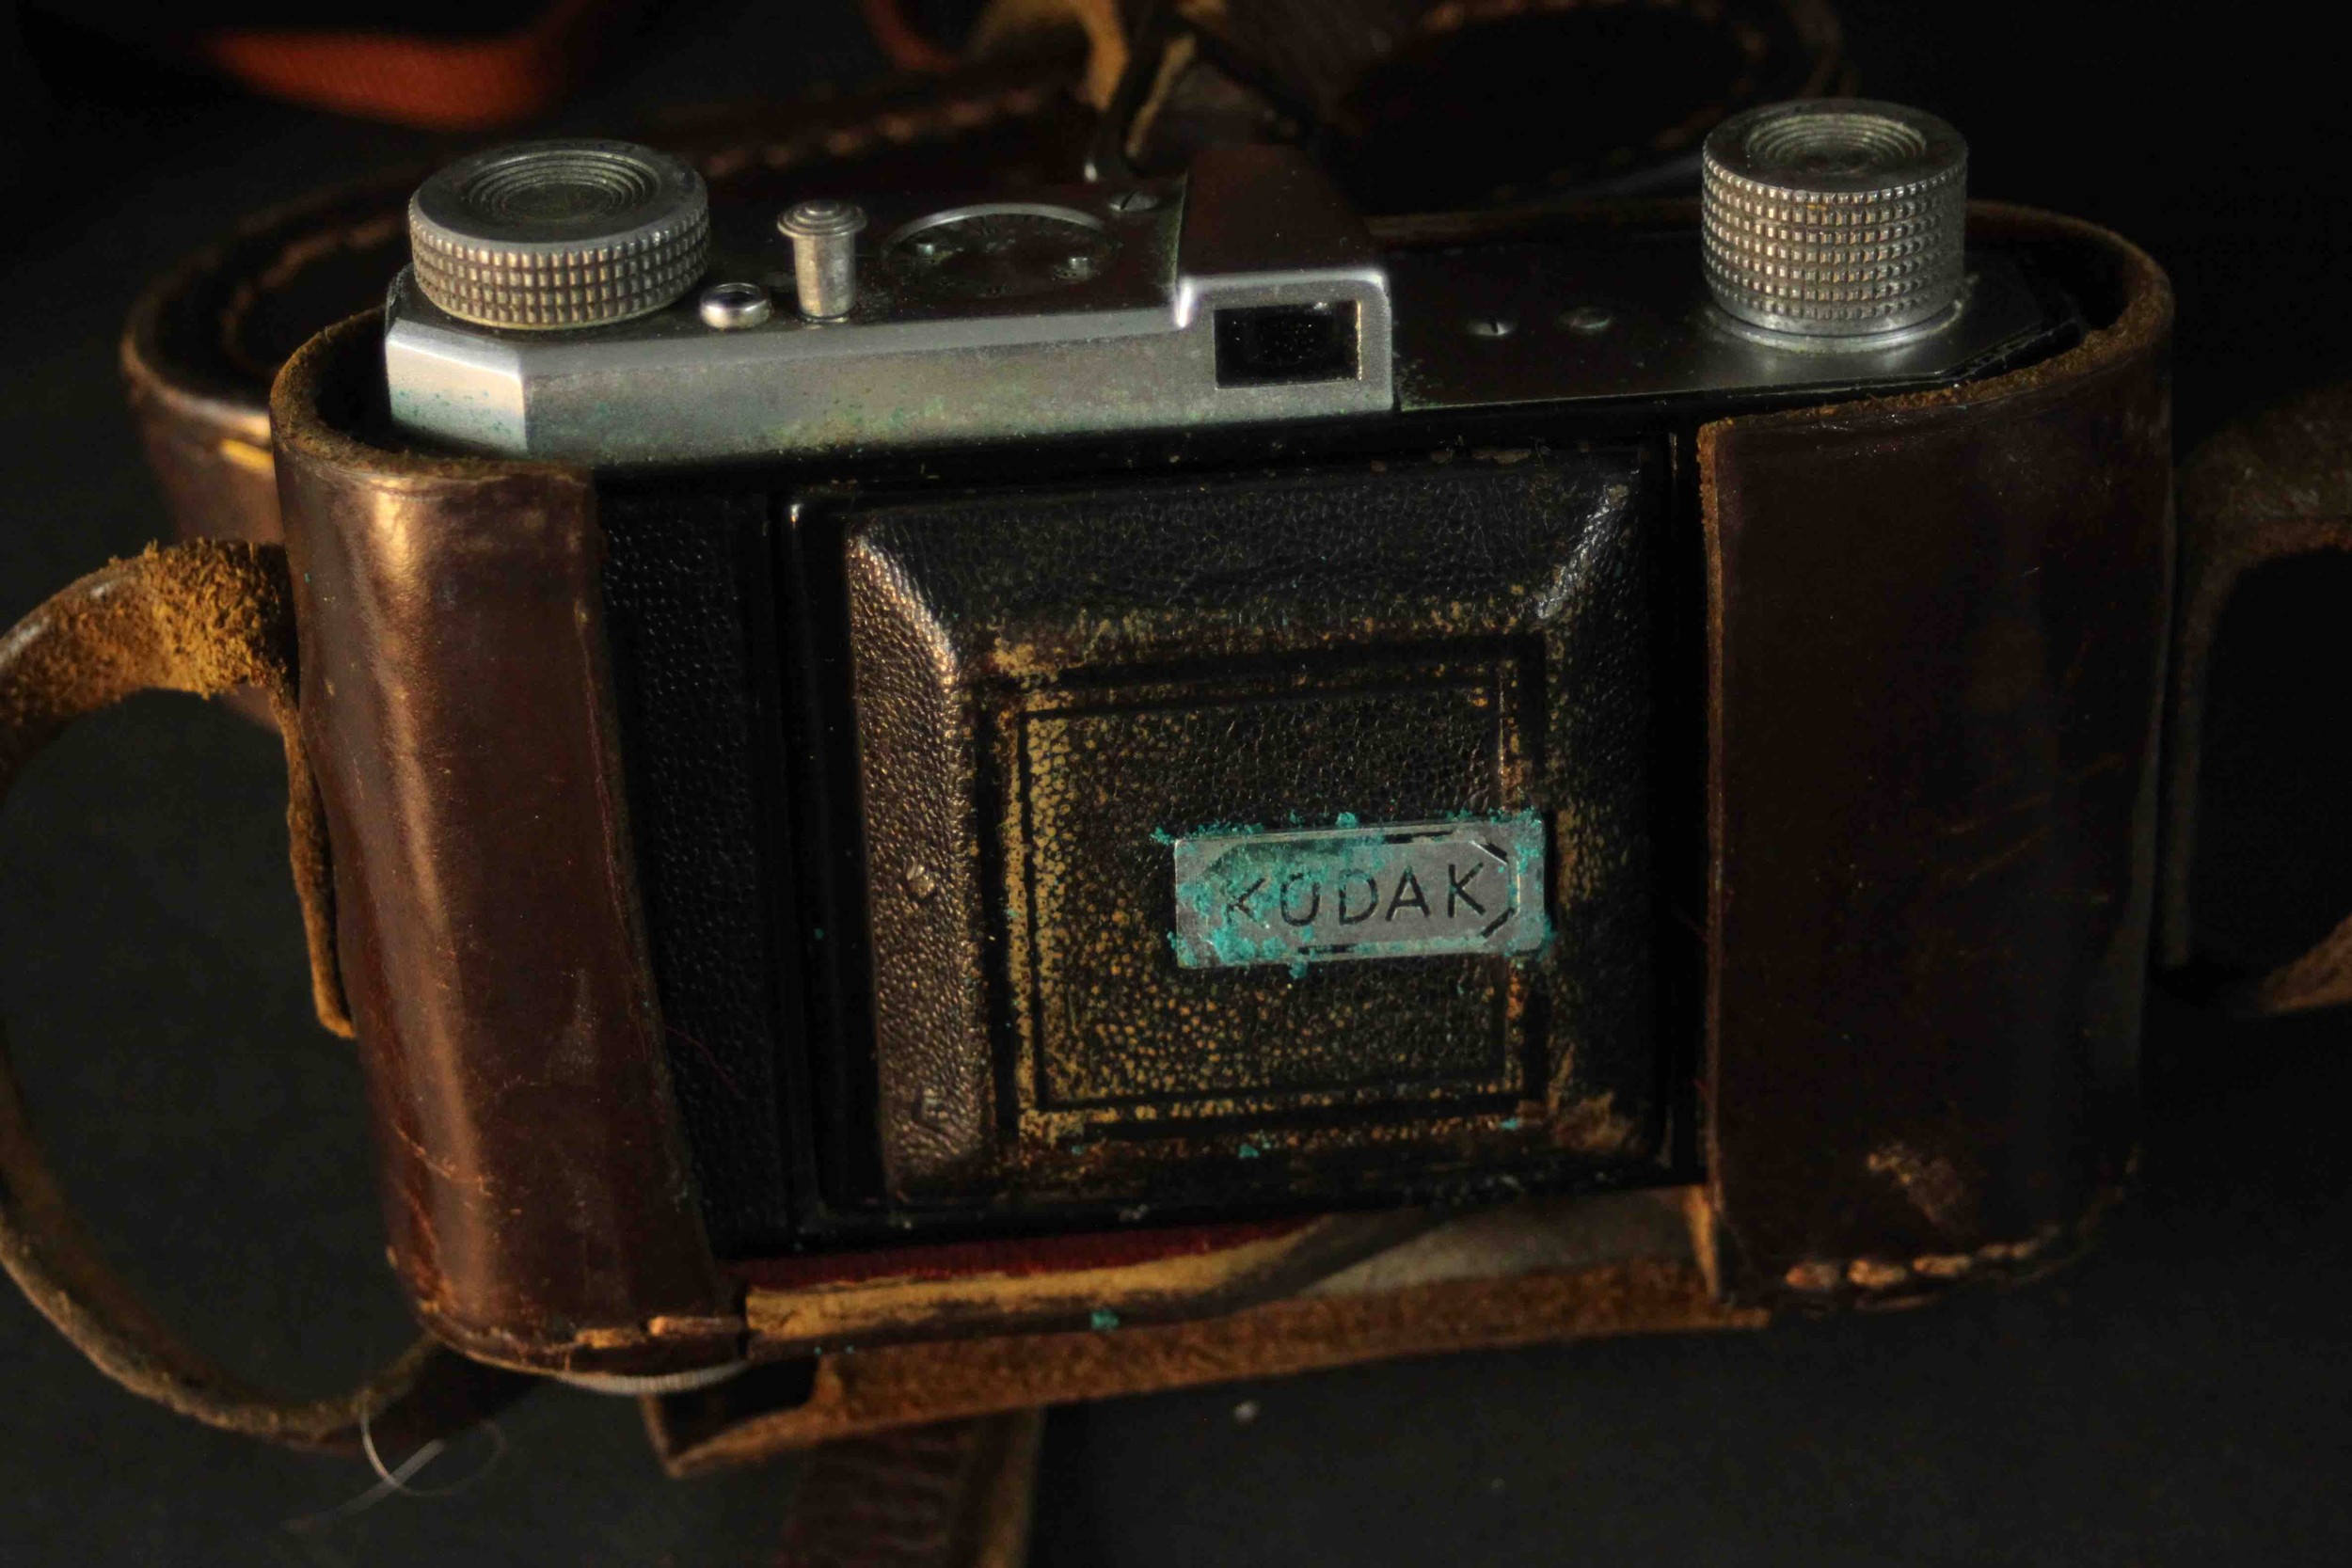 A collection of four vintage cameras. A Kodak Retinette 1A, Kodak Automatic 8, and two pairs of - Image 4 of 11